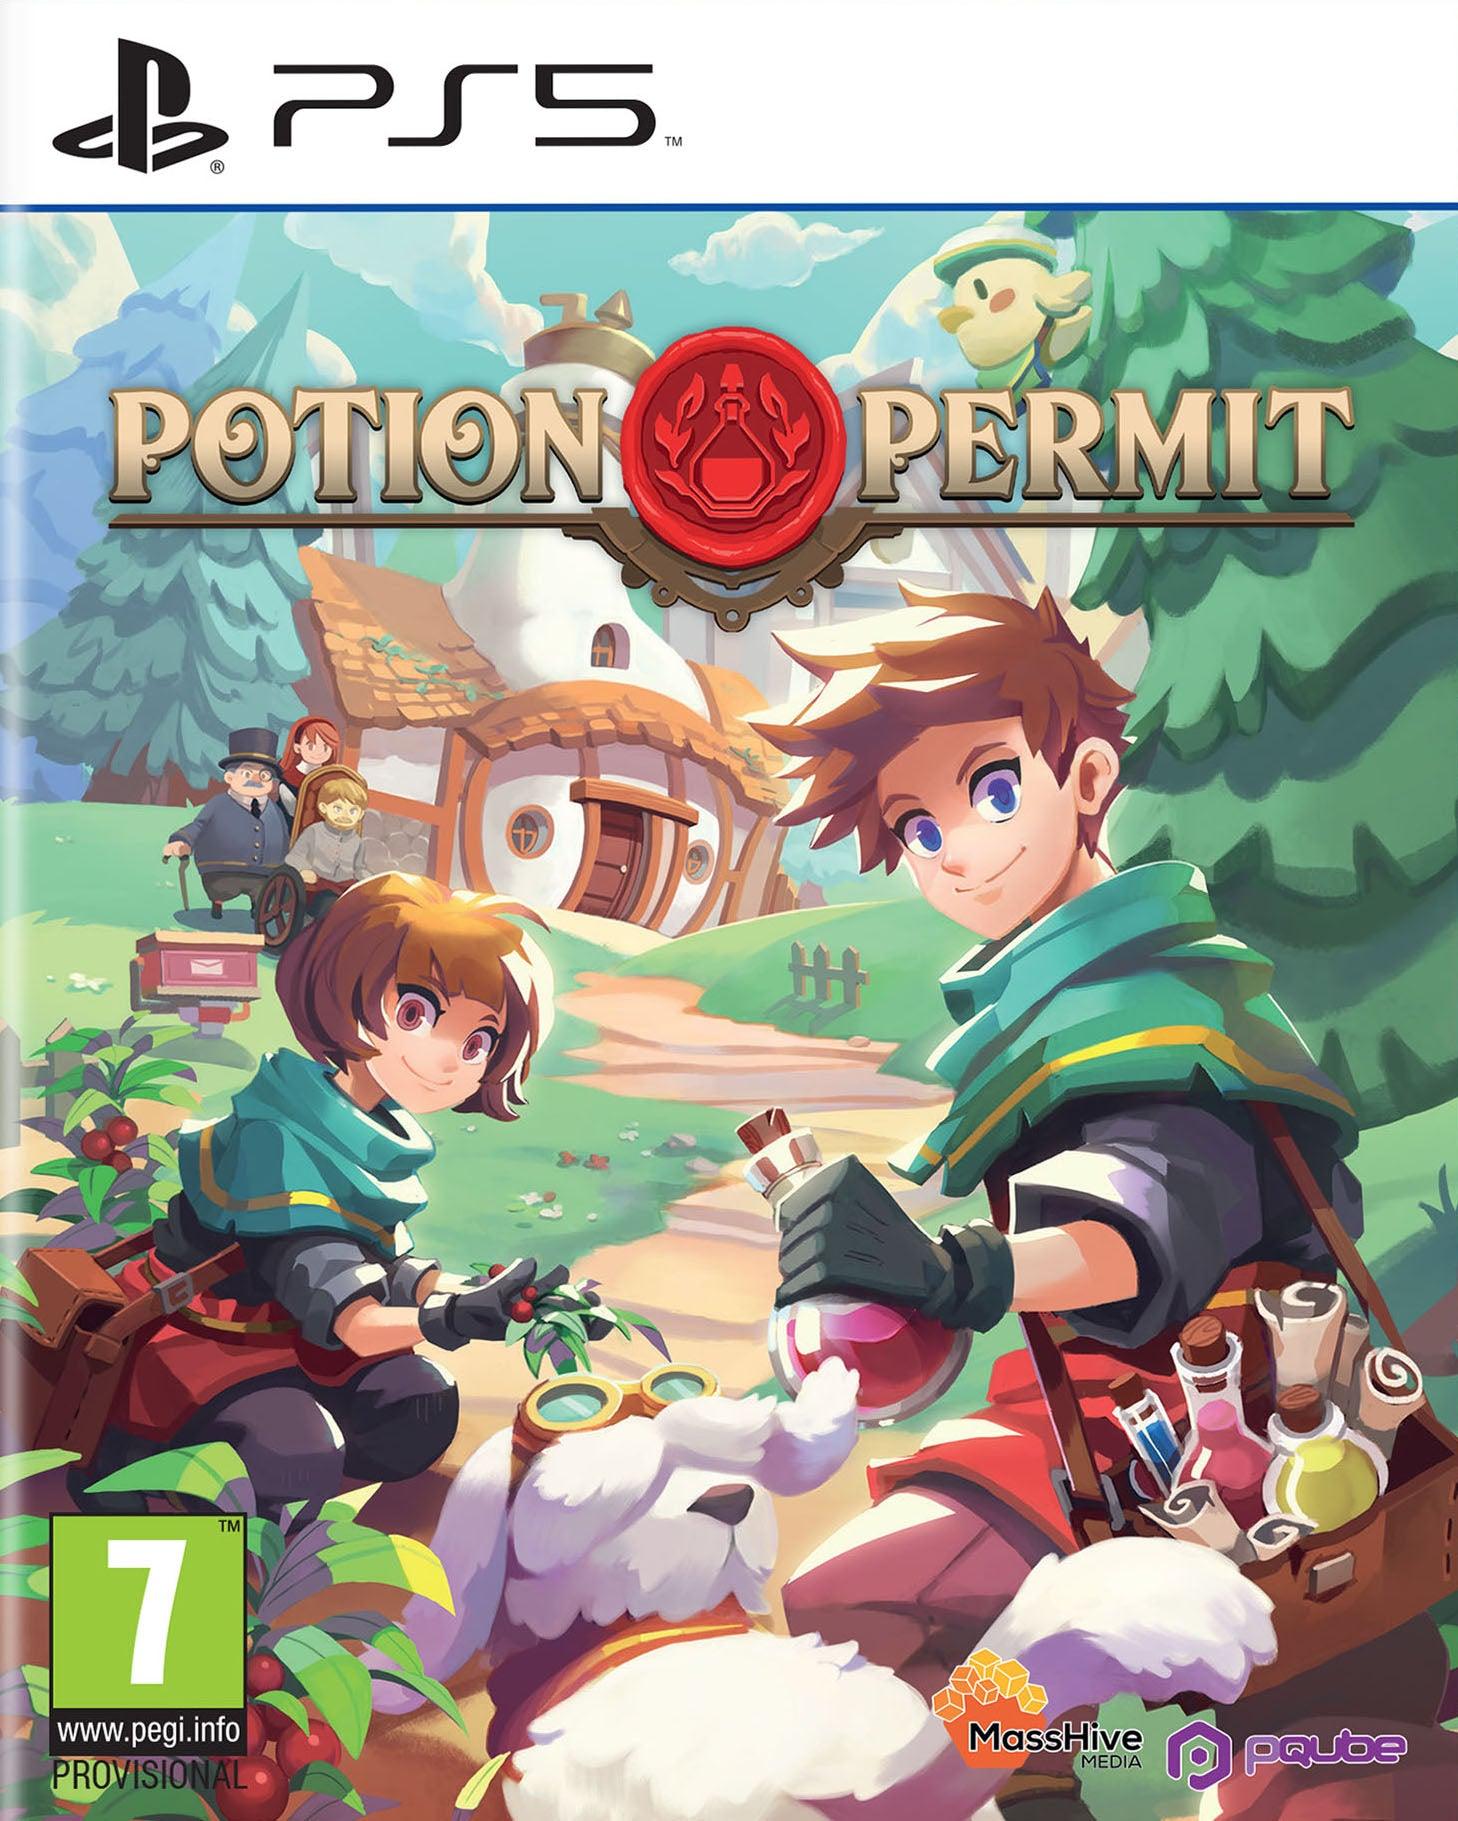 Potion Permit - Want a New Gadget